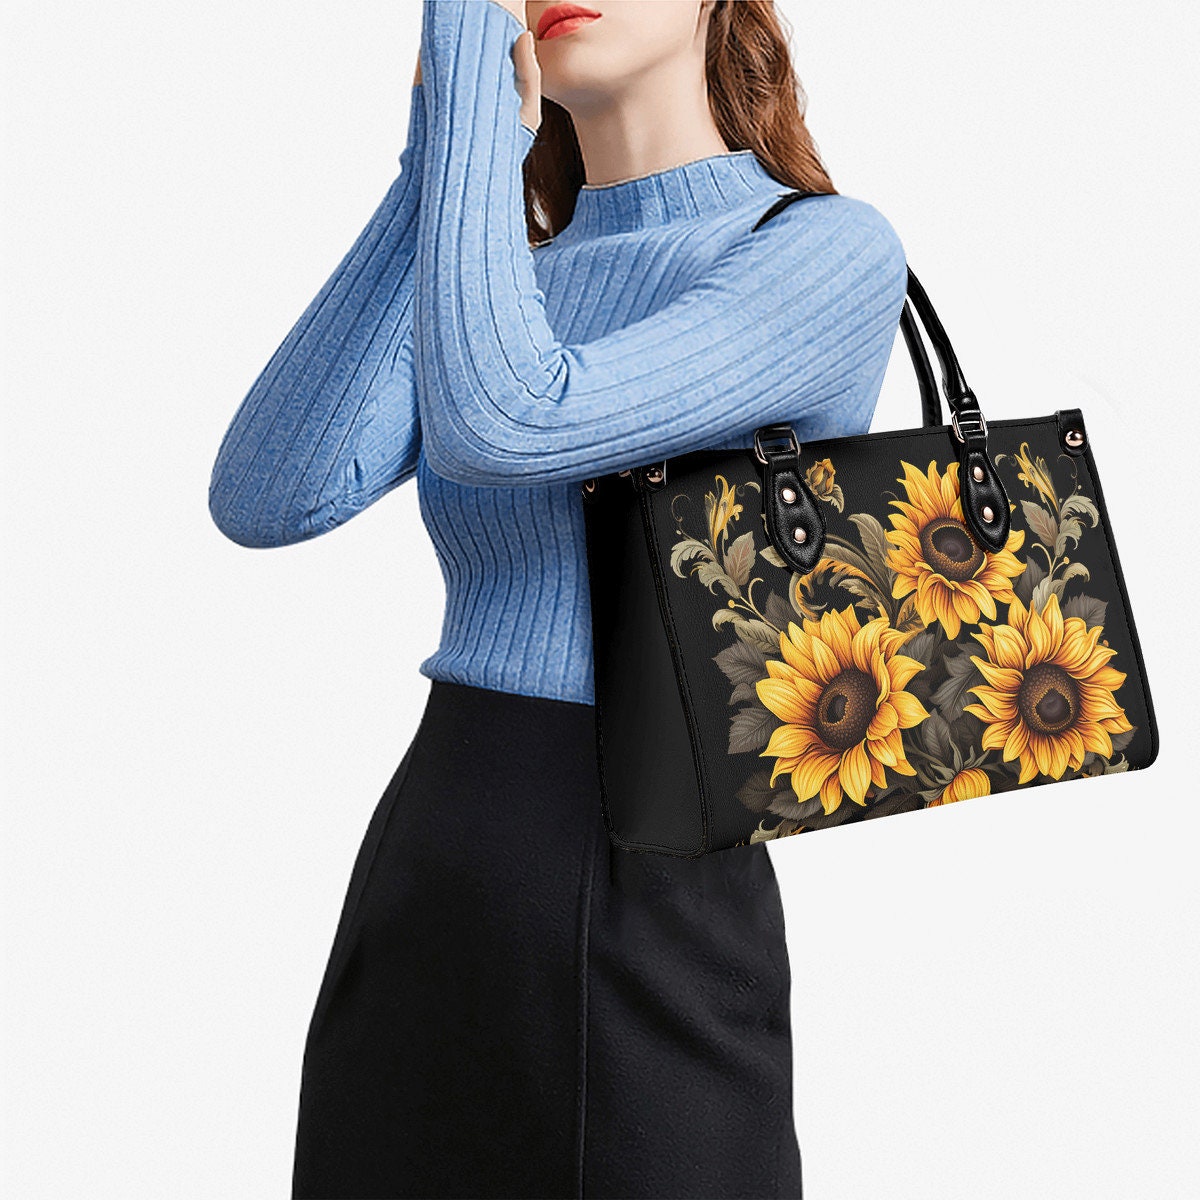 Sunflower Leather Tote Bag  PU Leather Handbag with Flower Pattern, Perfect Sunflower Gift